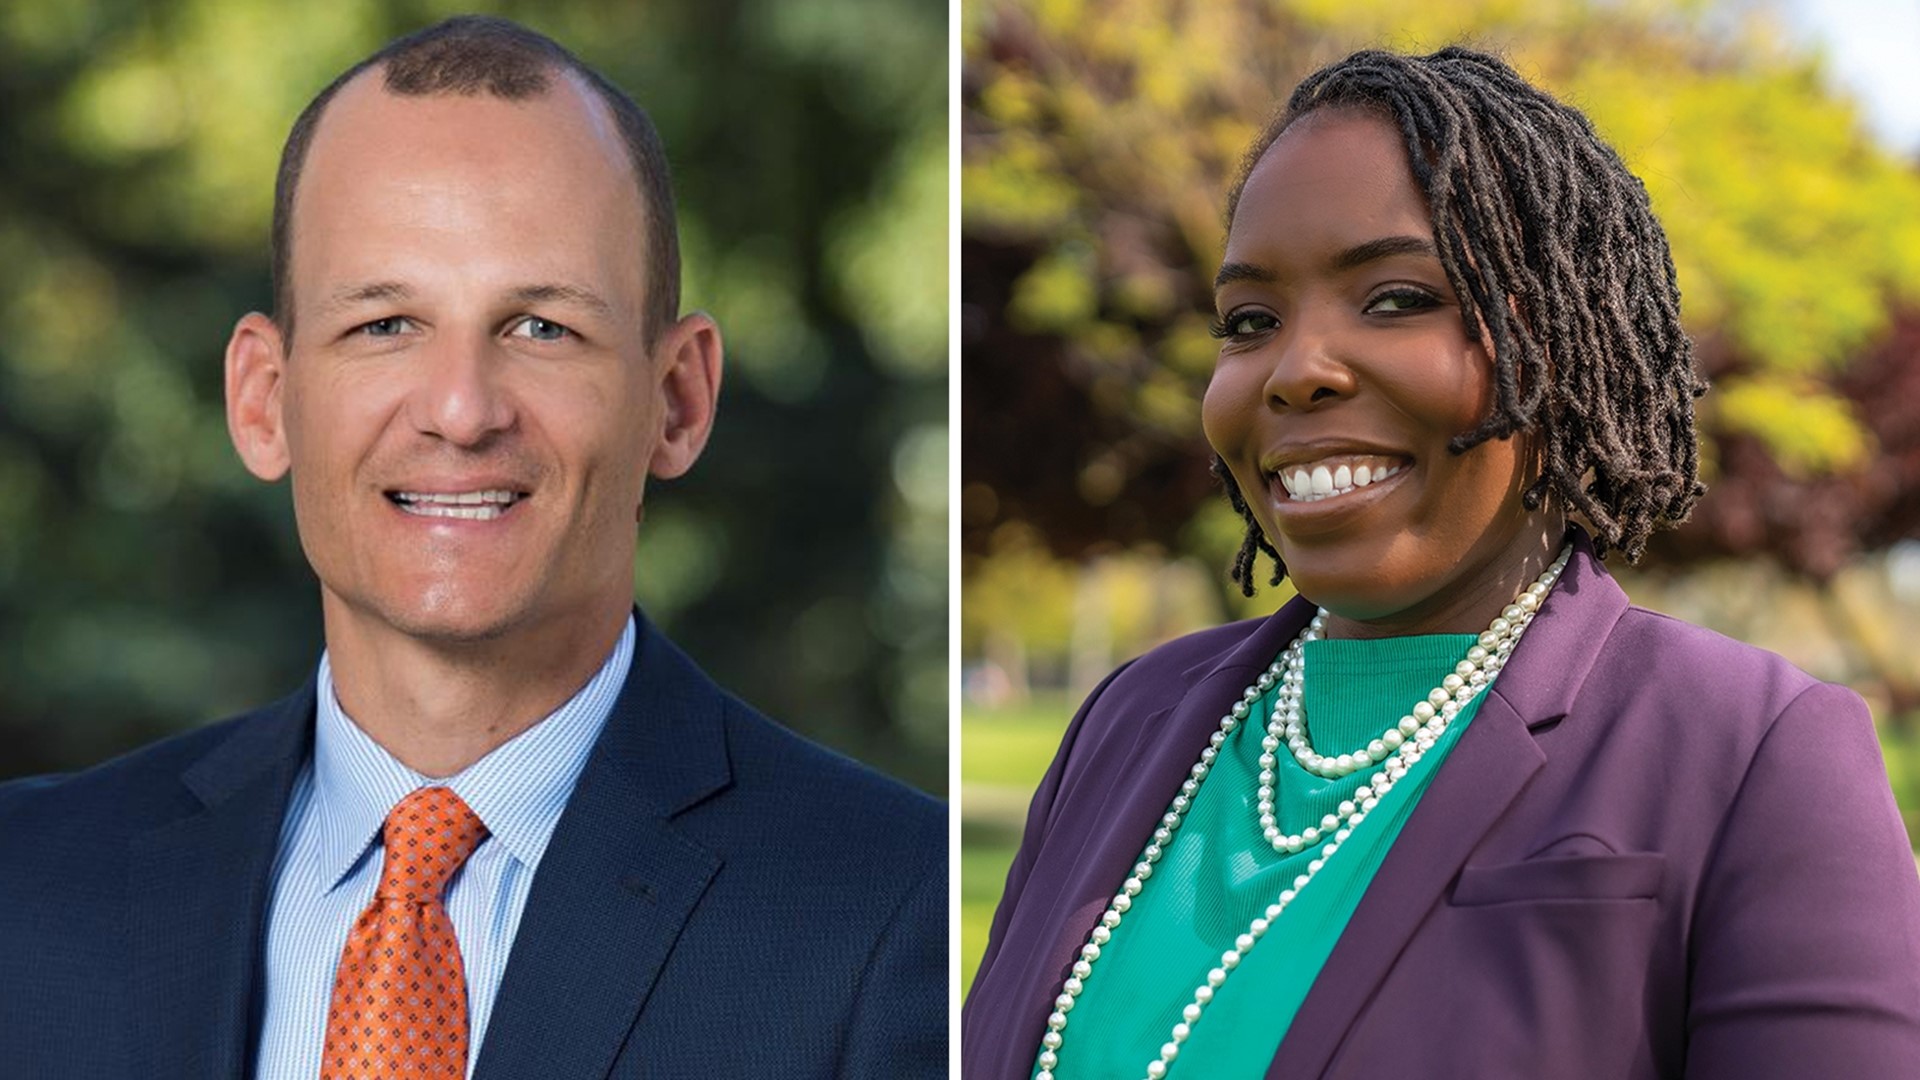 With less than six months until the November election, the race for Sacramento Mayor is heating up between Flojaune 'Flo' Cofer and Kevin McCarty.